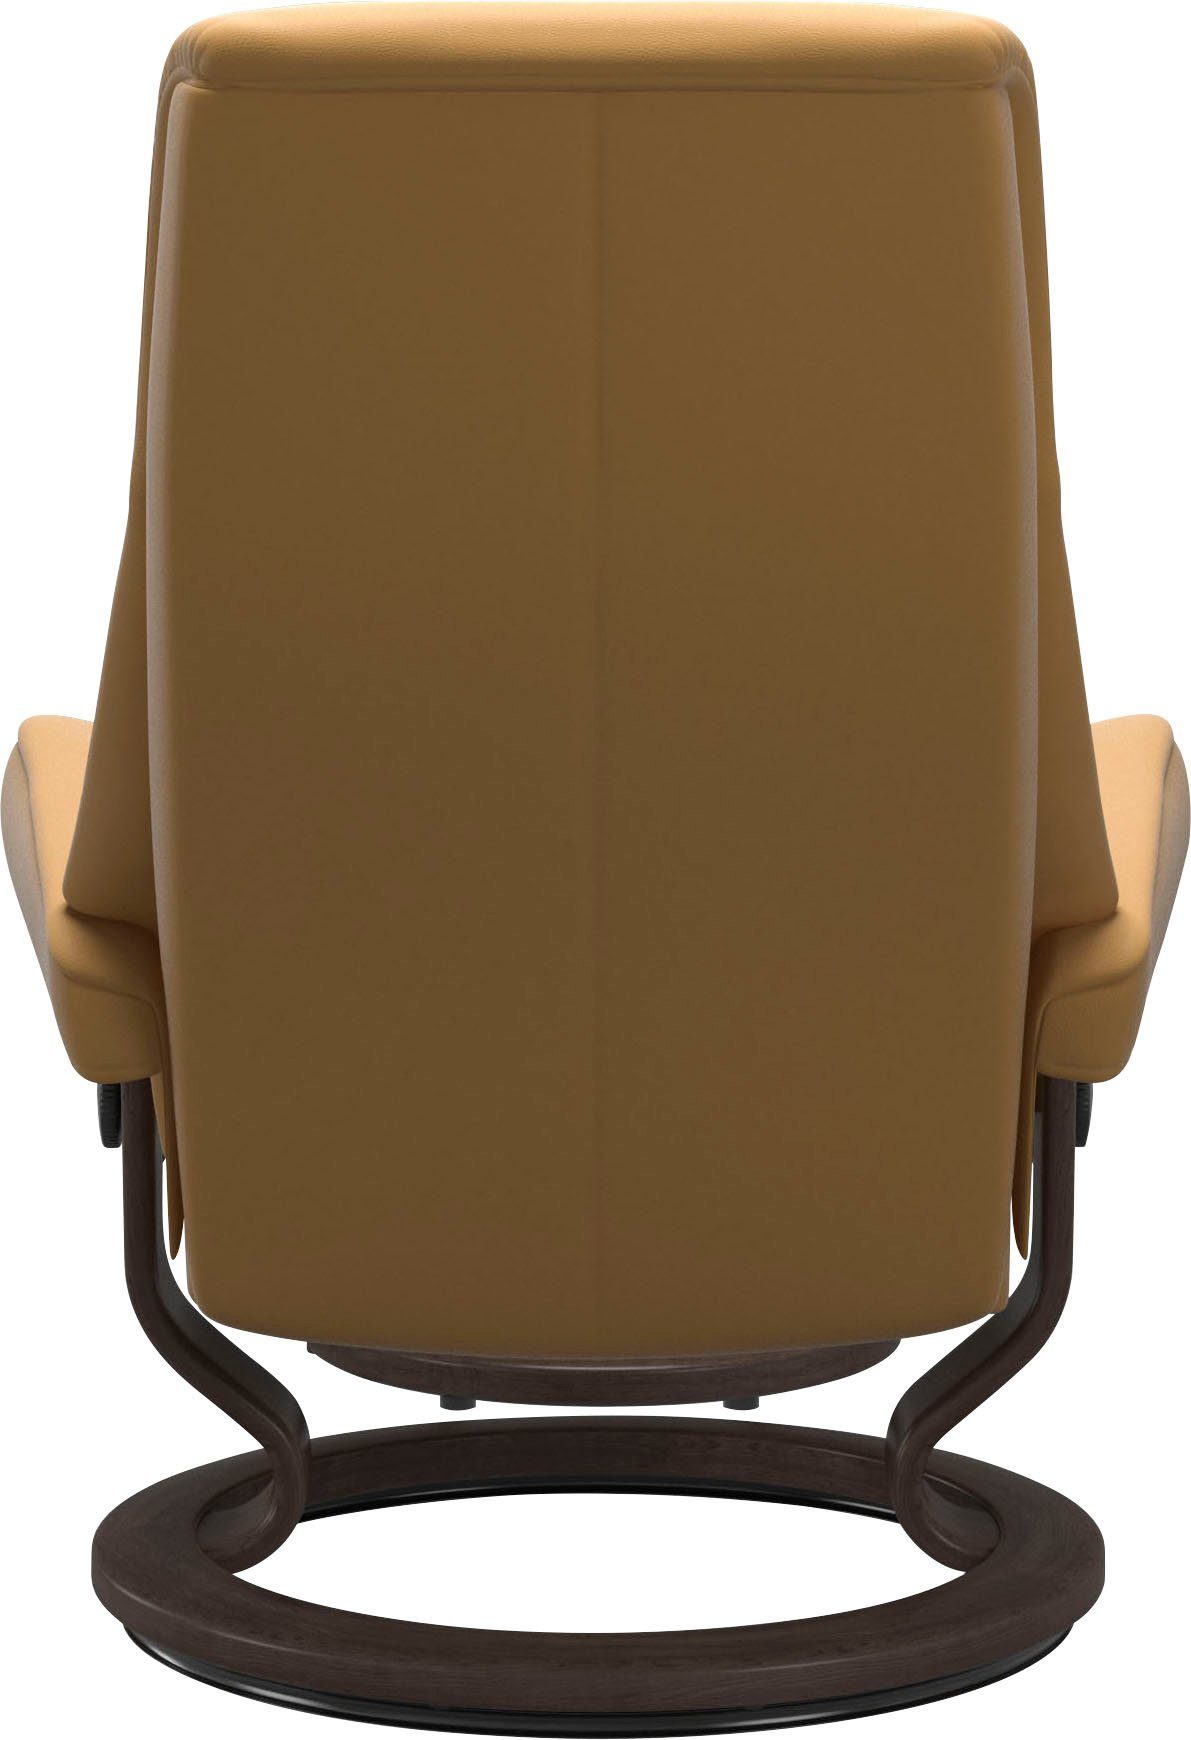 Stressless® Relaxsessel View, mit Classic Wenge Größe Base, S,Gestell